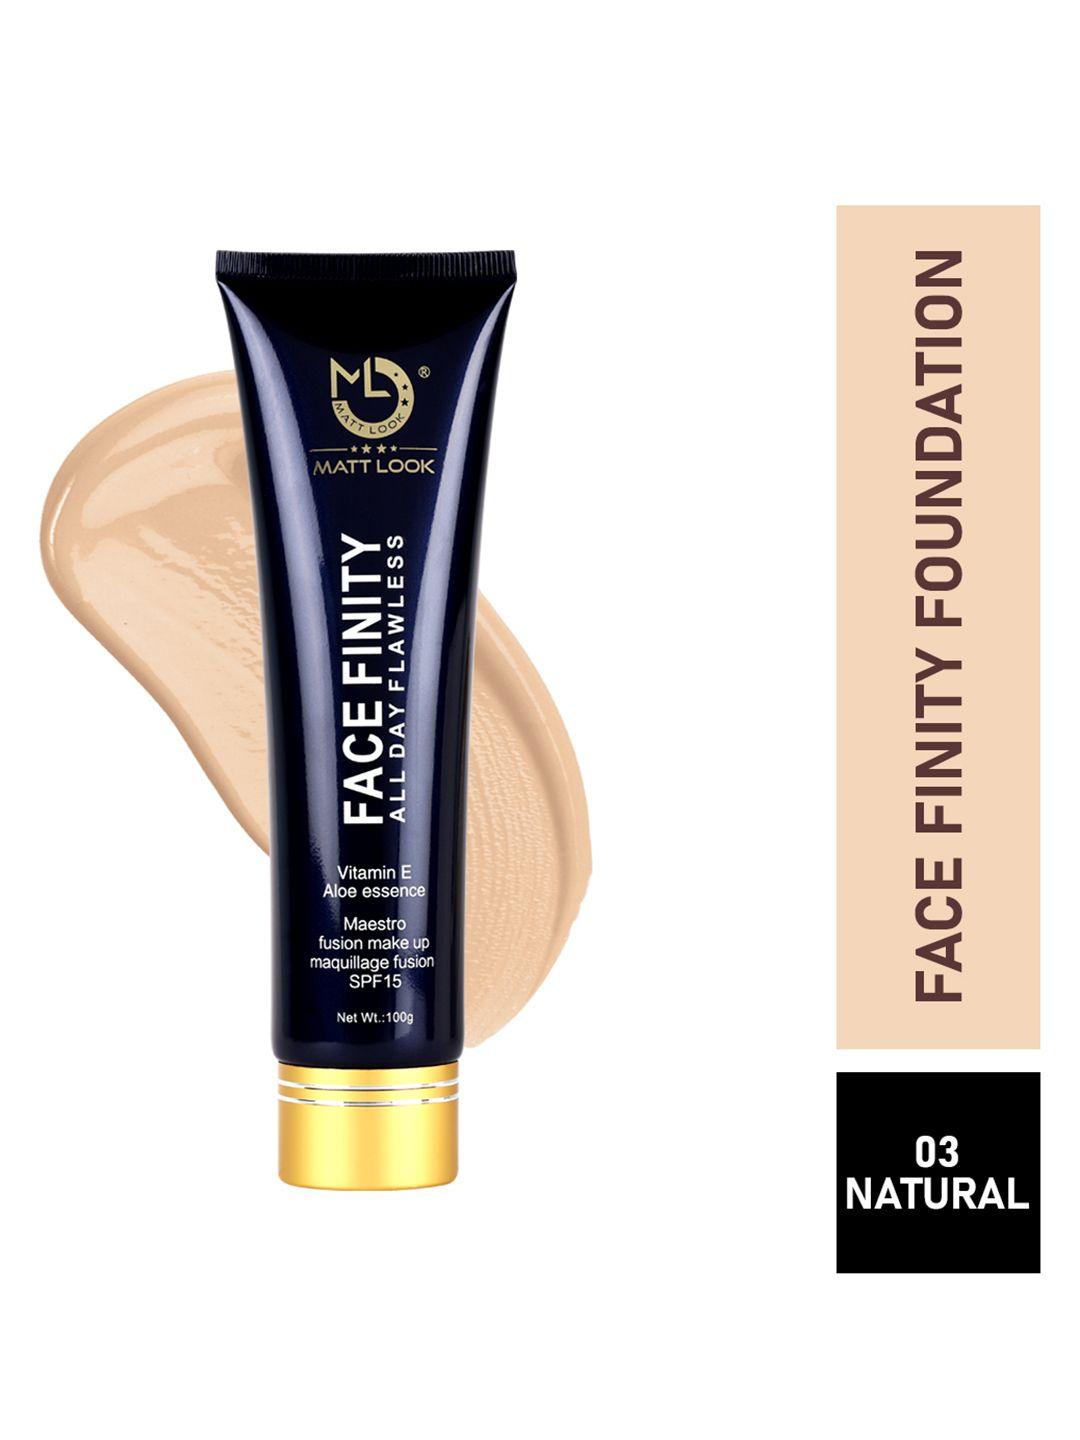 mattlook meastro fusion make up foundation spf 15 natural - 100 gm